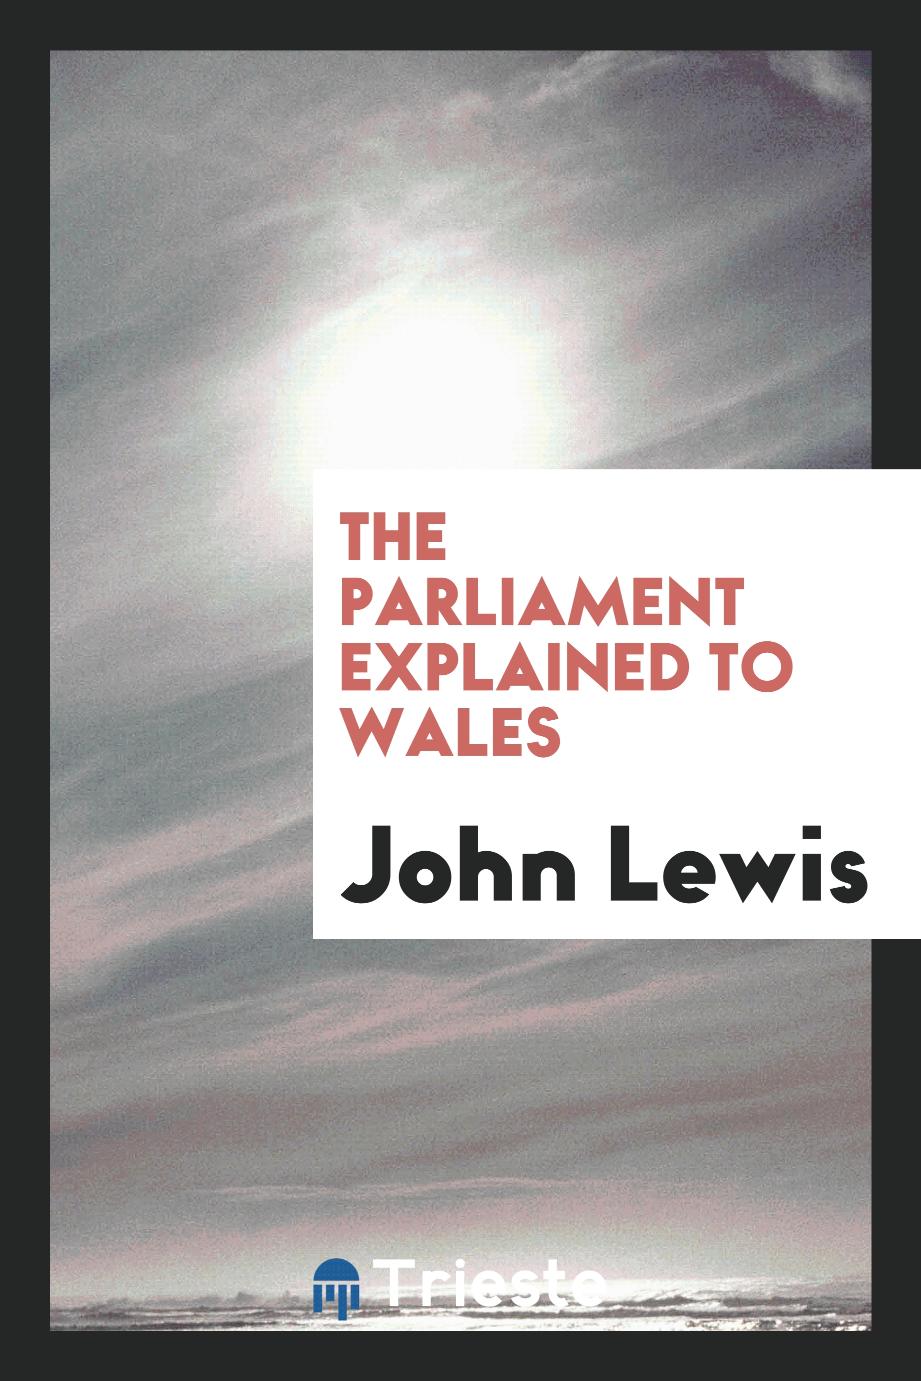 The Parliament explained to Wales